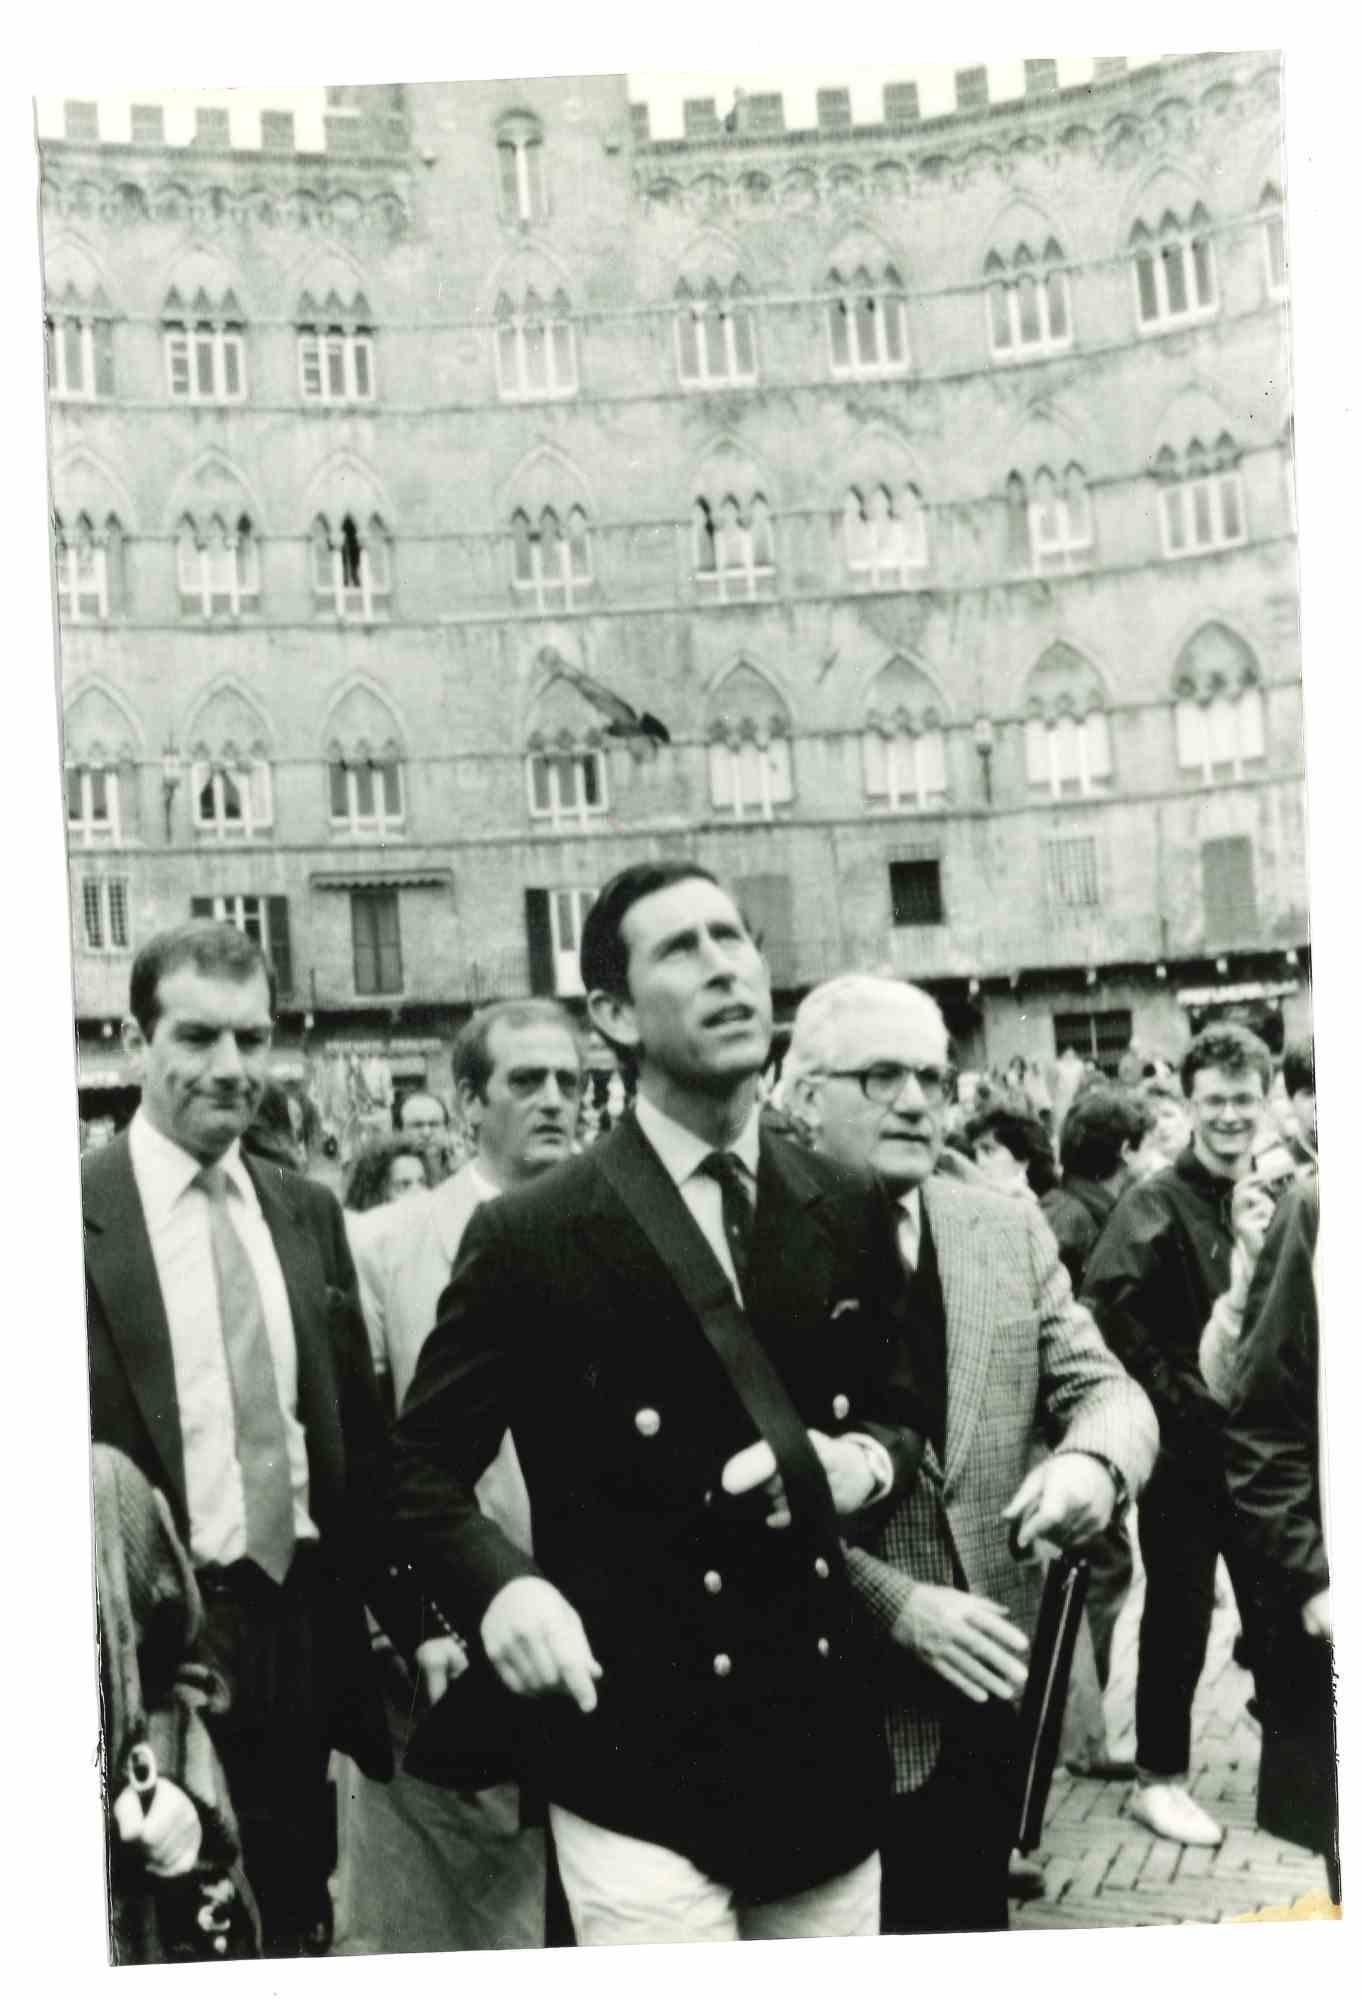 Unknown Figurative Photograph - Prince Charles in Italy - 1960s